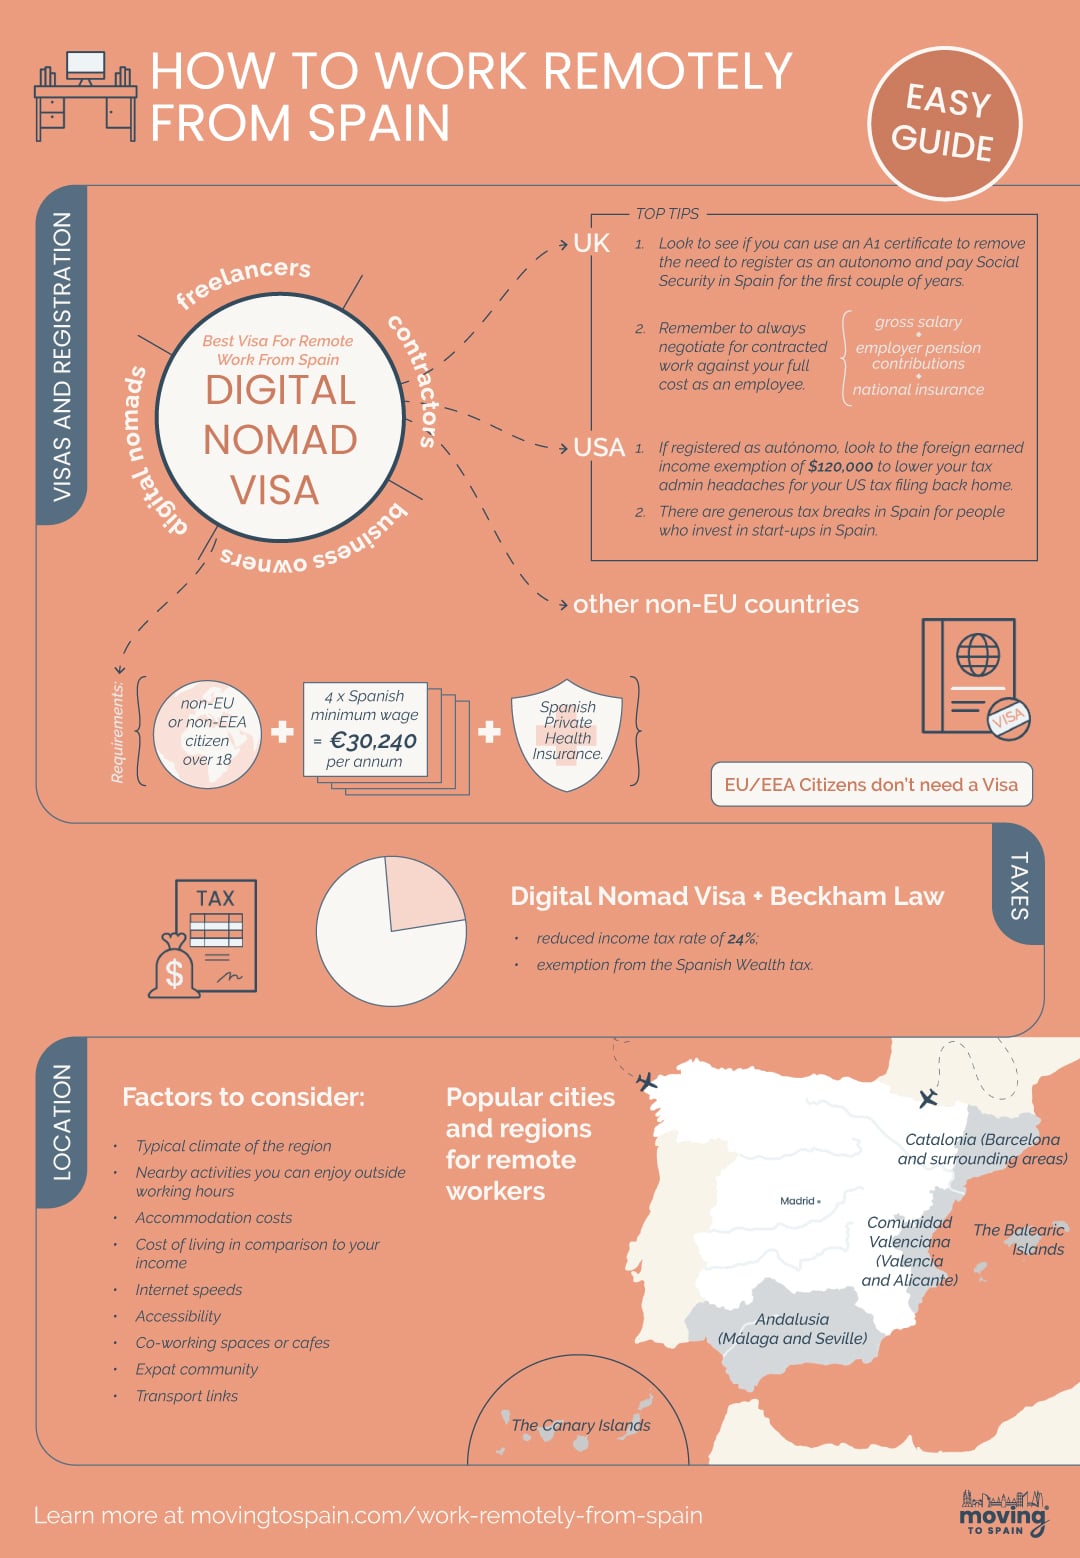 How to Work Remotely From Spain Infographic